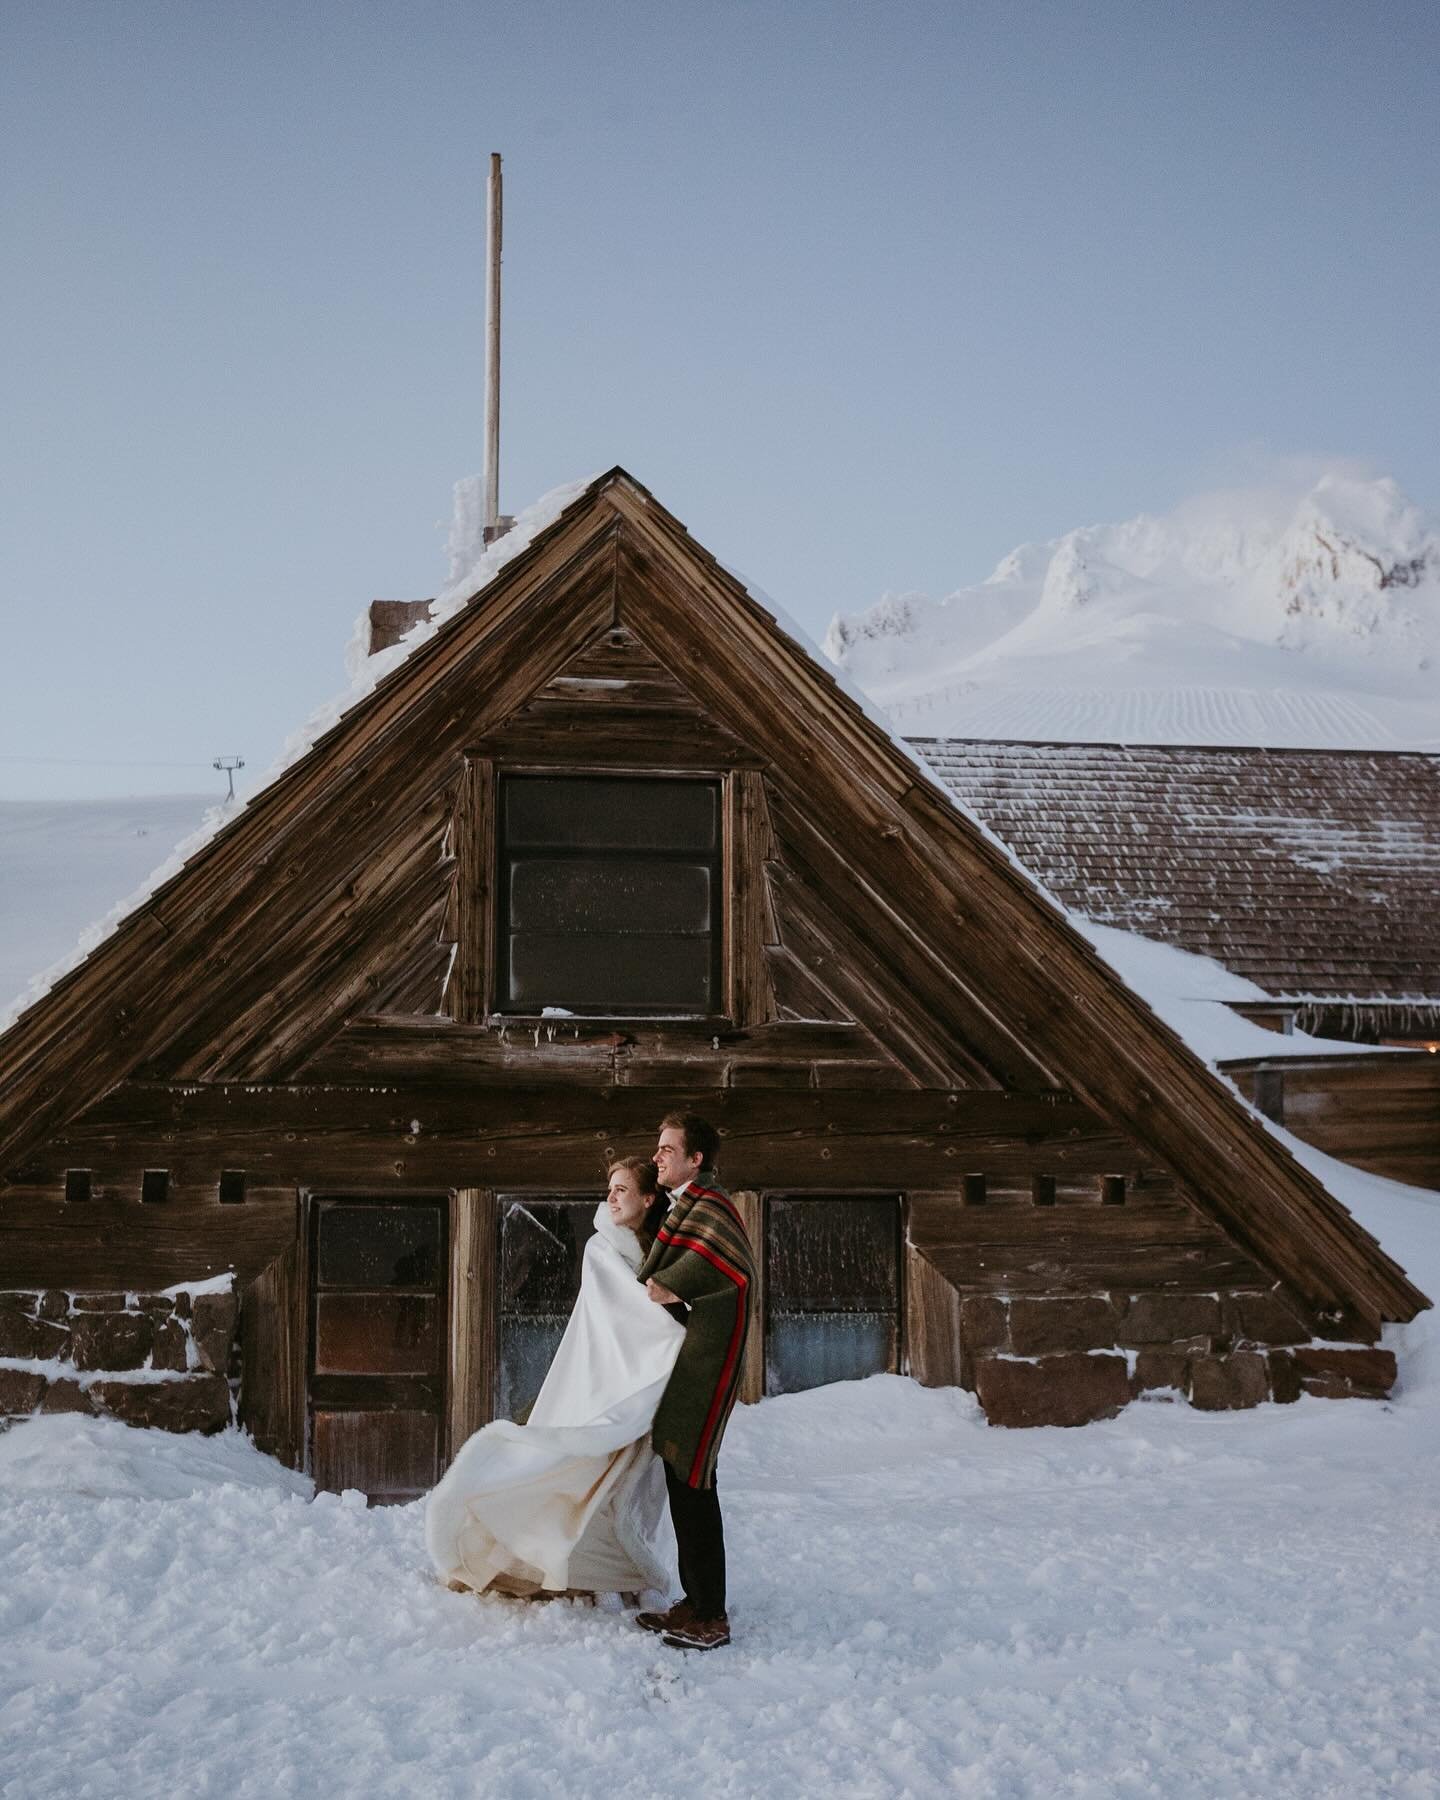 Aaand a few more epic shots from A&amp;M&rsquo;s micro wedding on Mount Hood - it was also the singular time I&rsquo;ve seen the mountain top during any winter event I&rsquo;ve captured there haha! 
.
@timberlinelodge